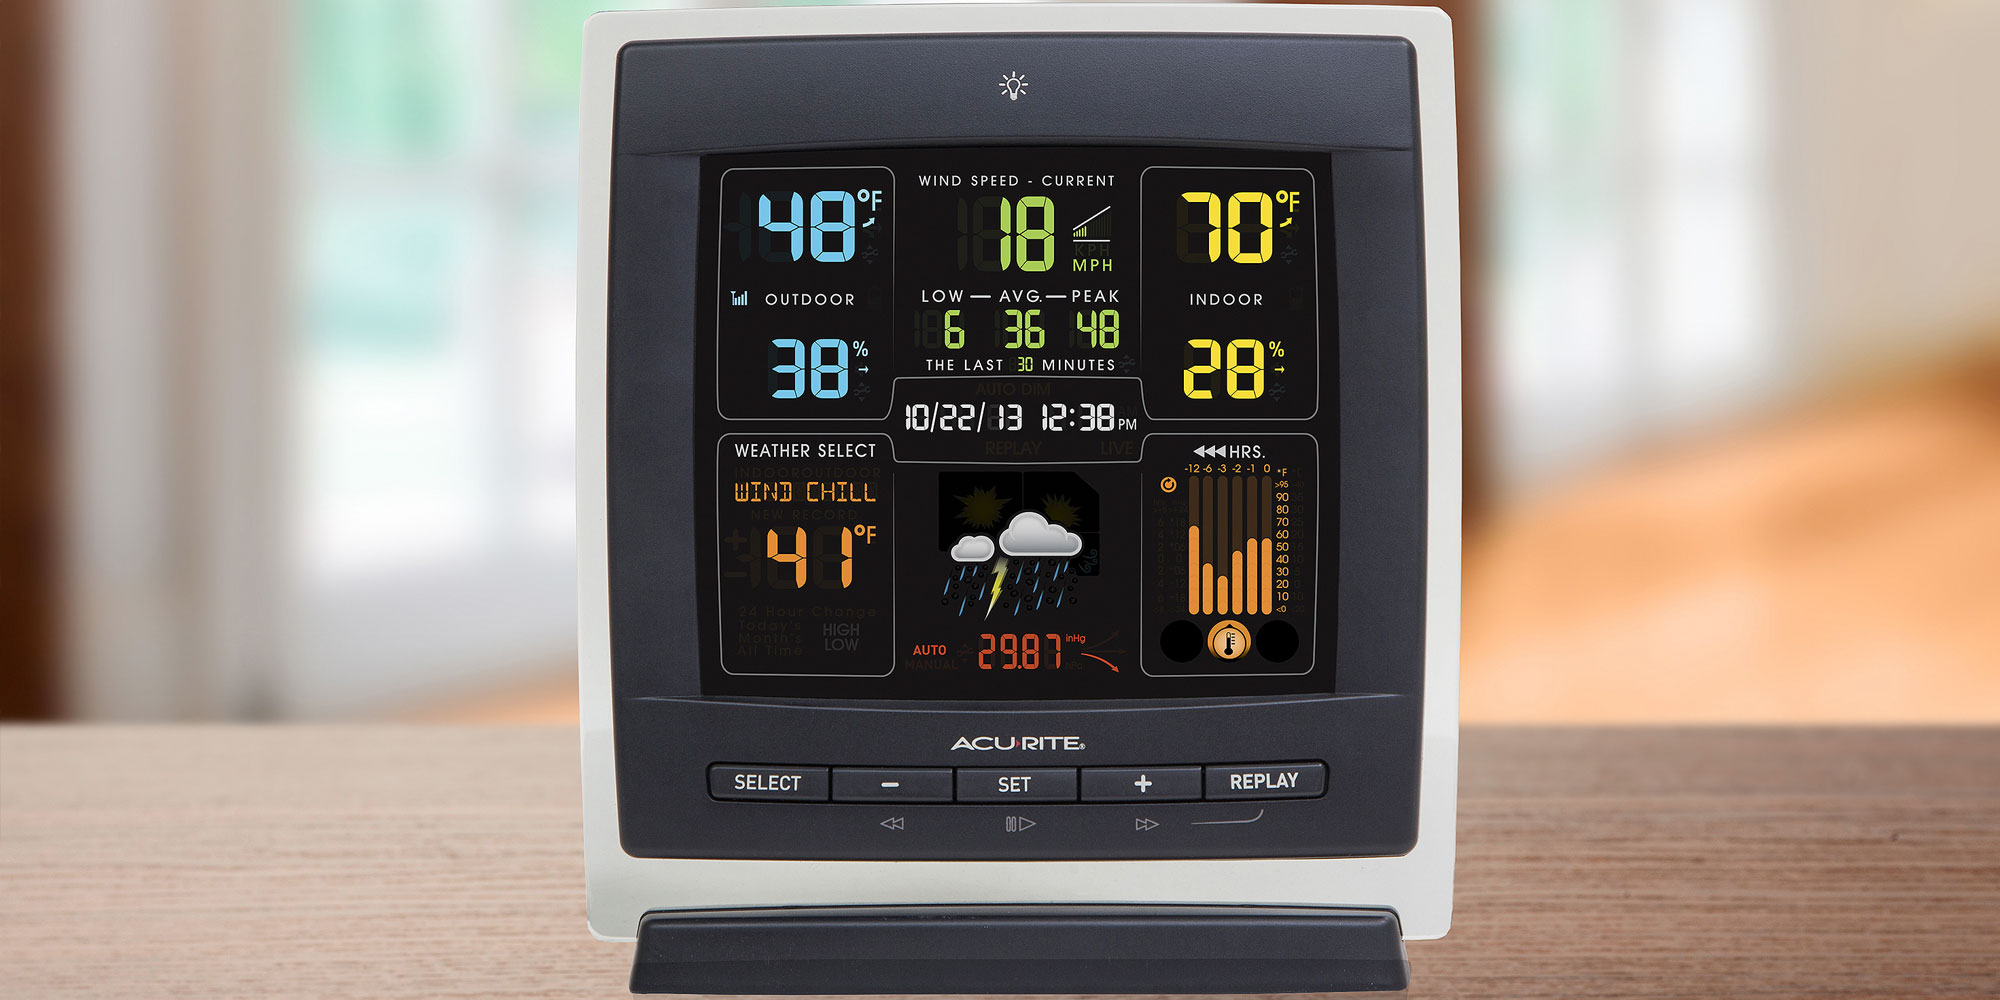 https://9to5toys.com/wp-content/uploads/sites/5/2018/11/Acurite-Weather-Station.jpg